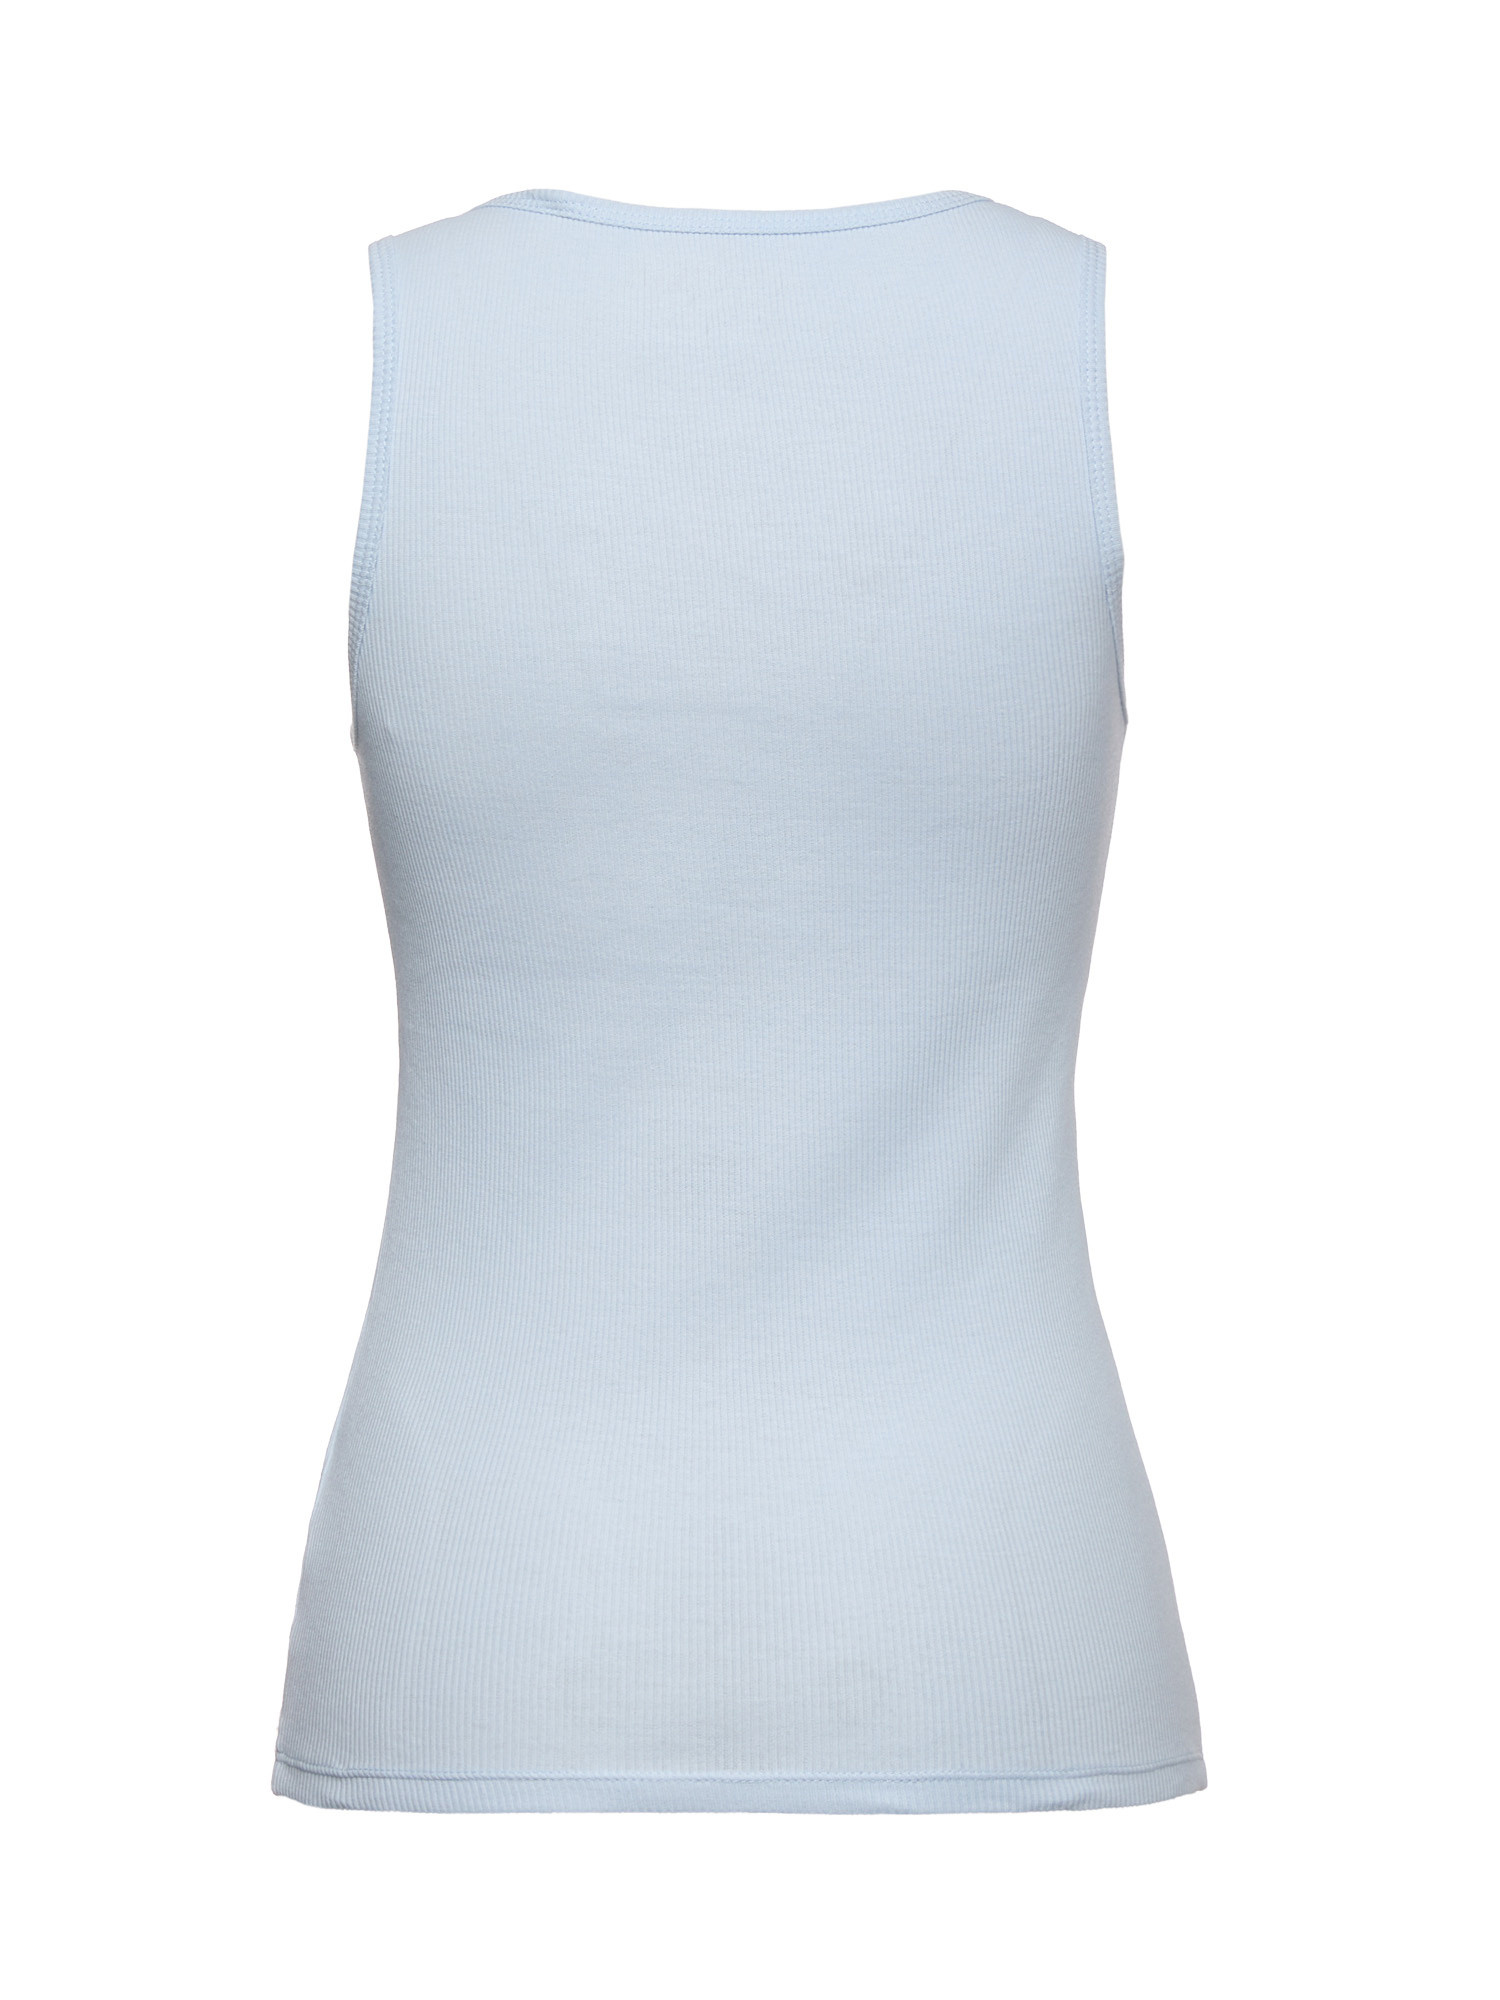 GUESS - Cotton tank top with logo, Light Blue, large image number 1